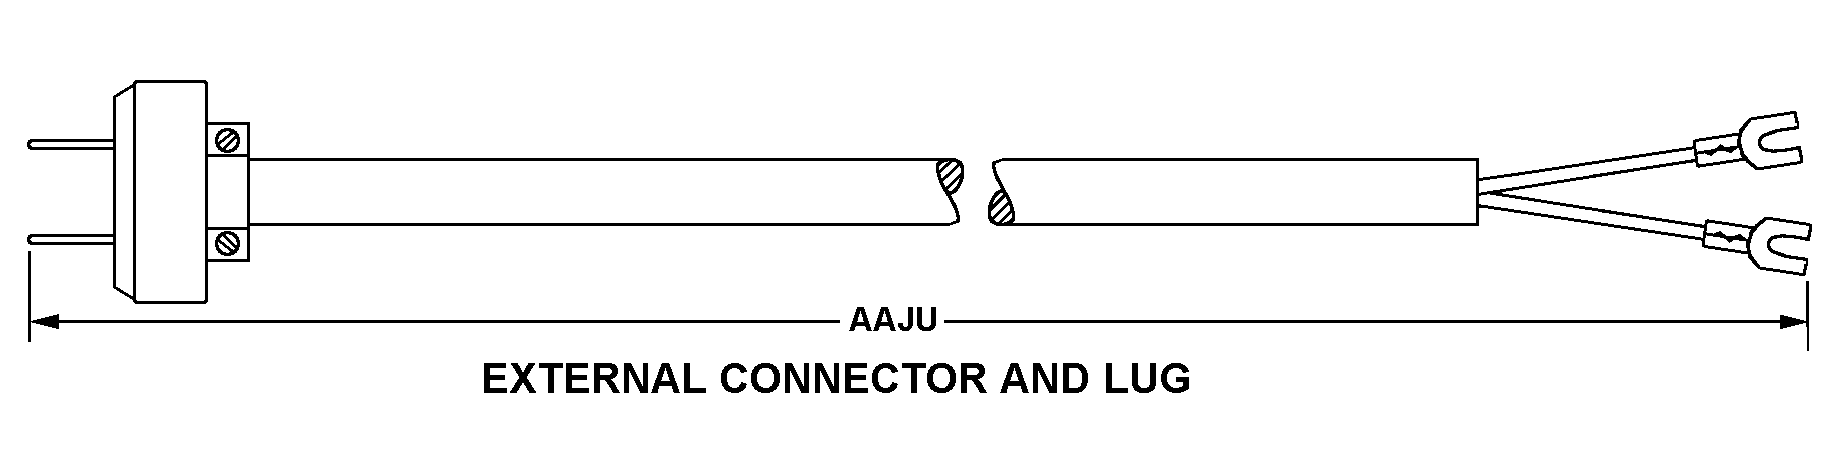 EXTERNAL CONNECTOR AND LUG style nsn 6150-01-198-9965